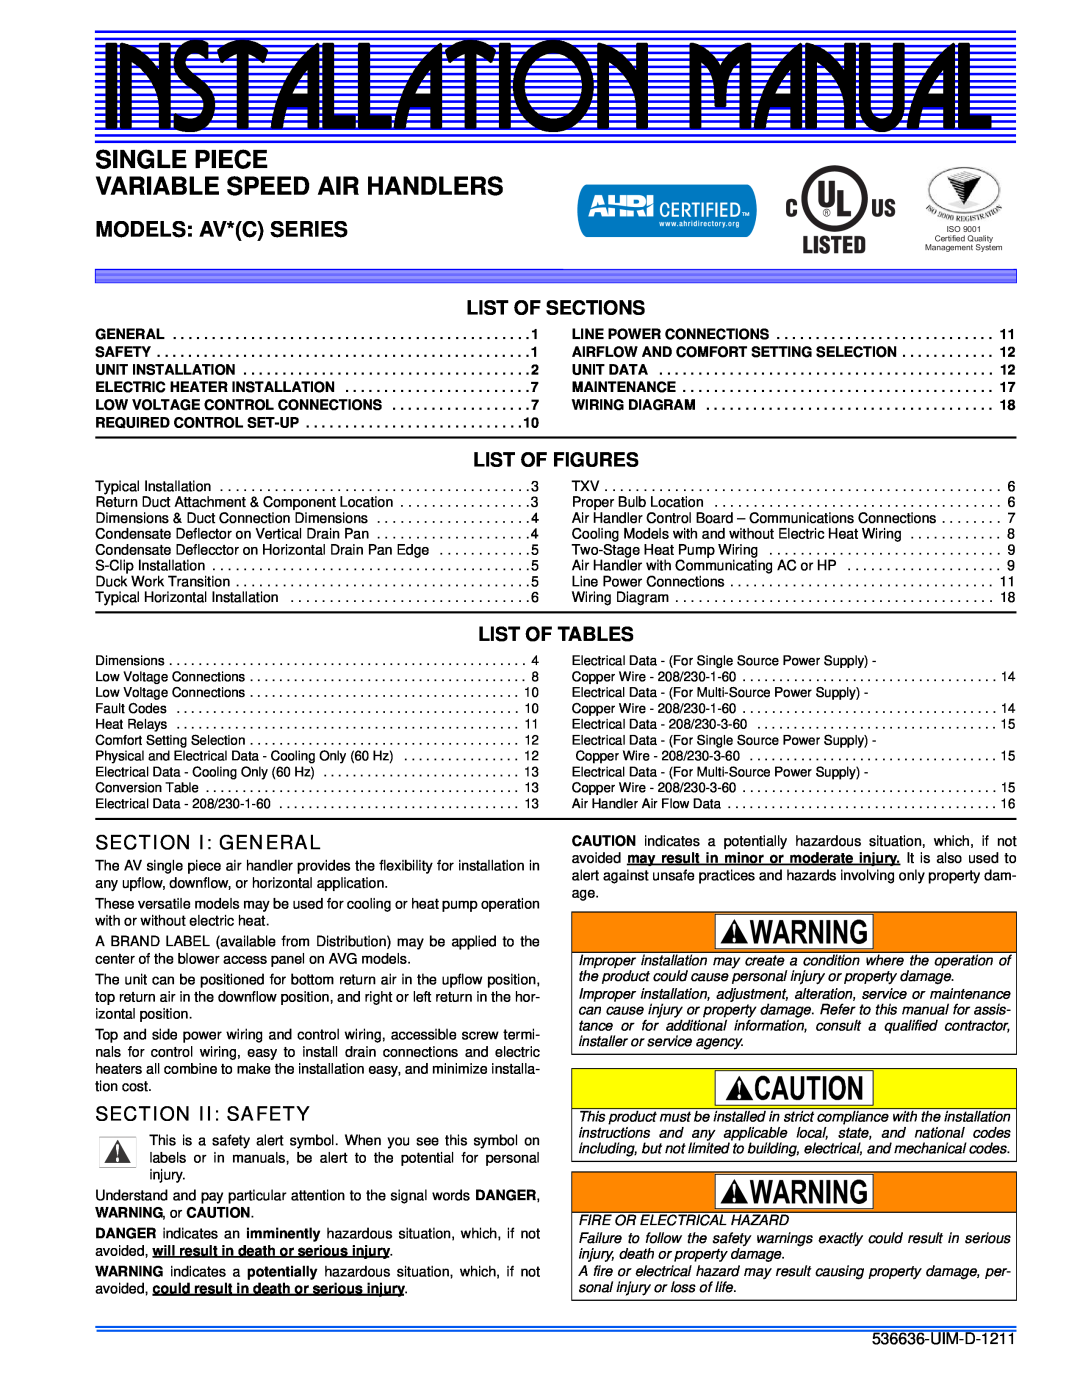 Johnson Controls AV*(C) Series installation manual List Of Sections, List Of Figures, List Of Tables, Section I General 